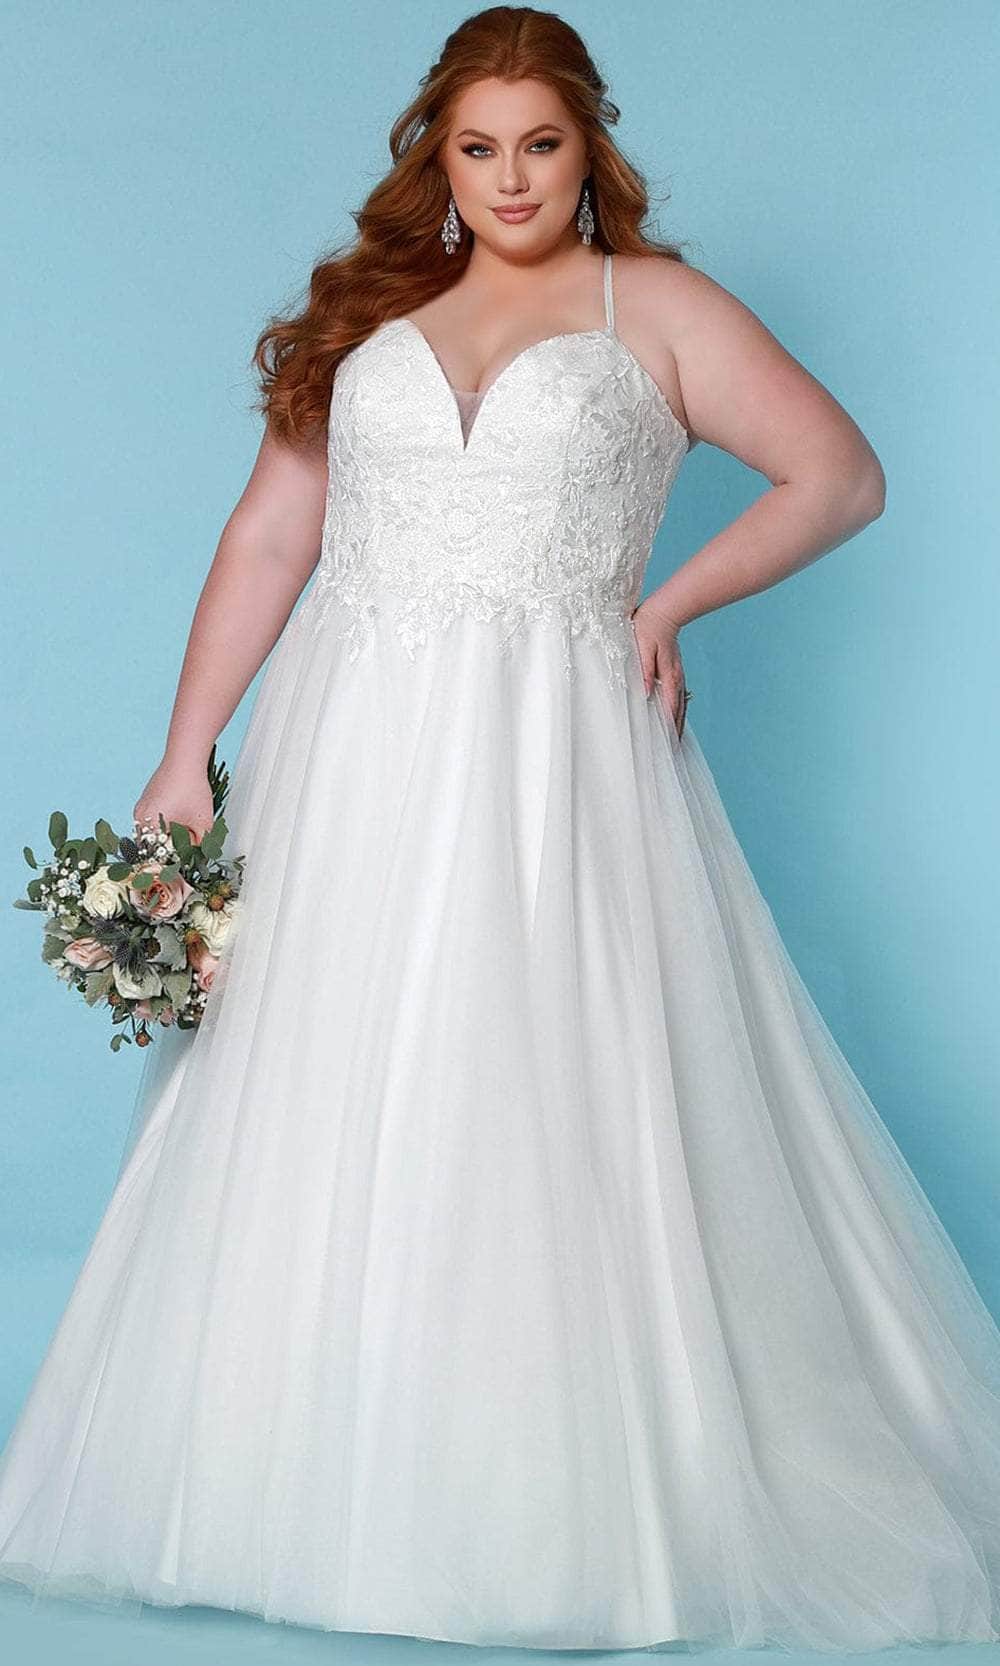 Image of Sydney's Closet Bridal - SC5277 Sweetheart Embroidered Bridal Gown